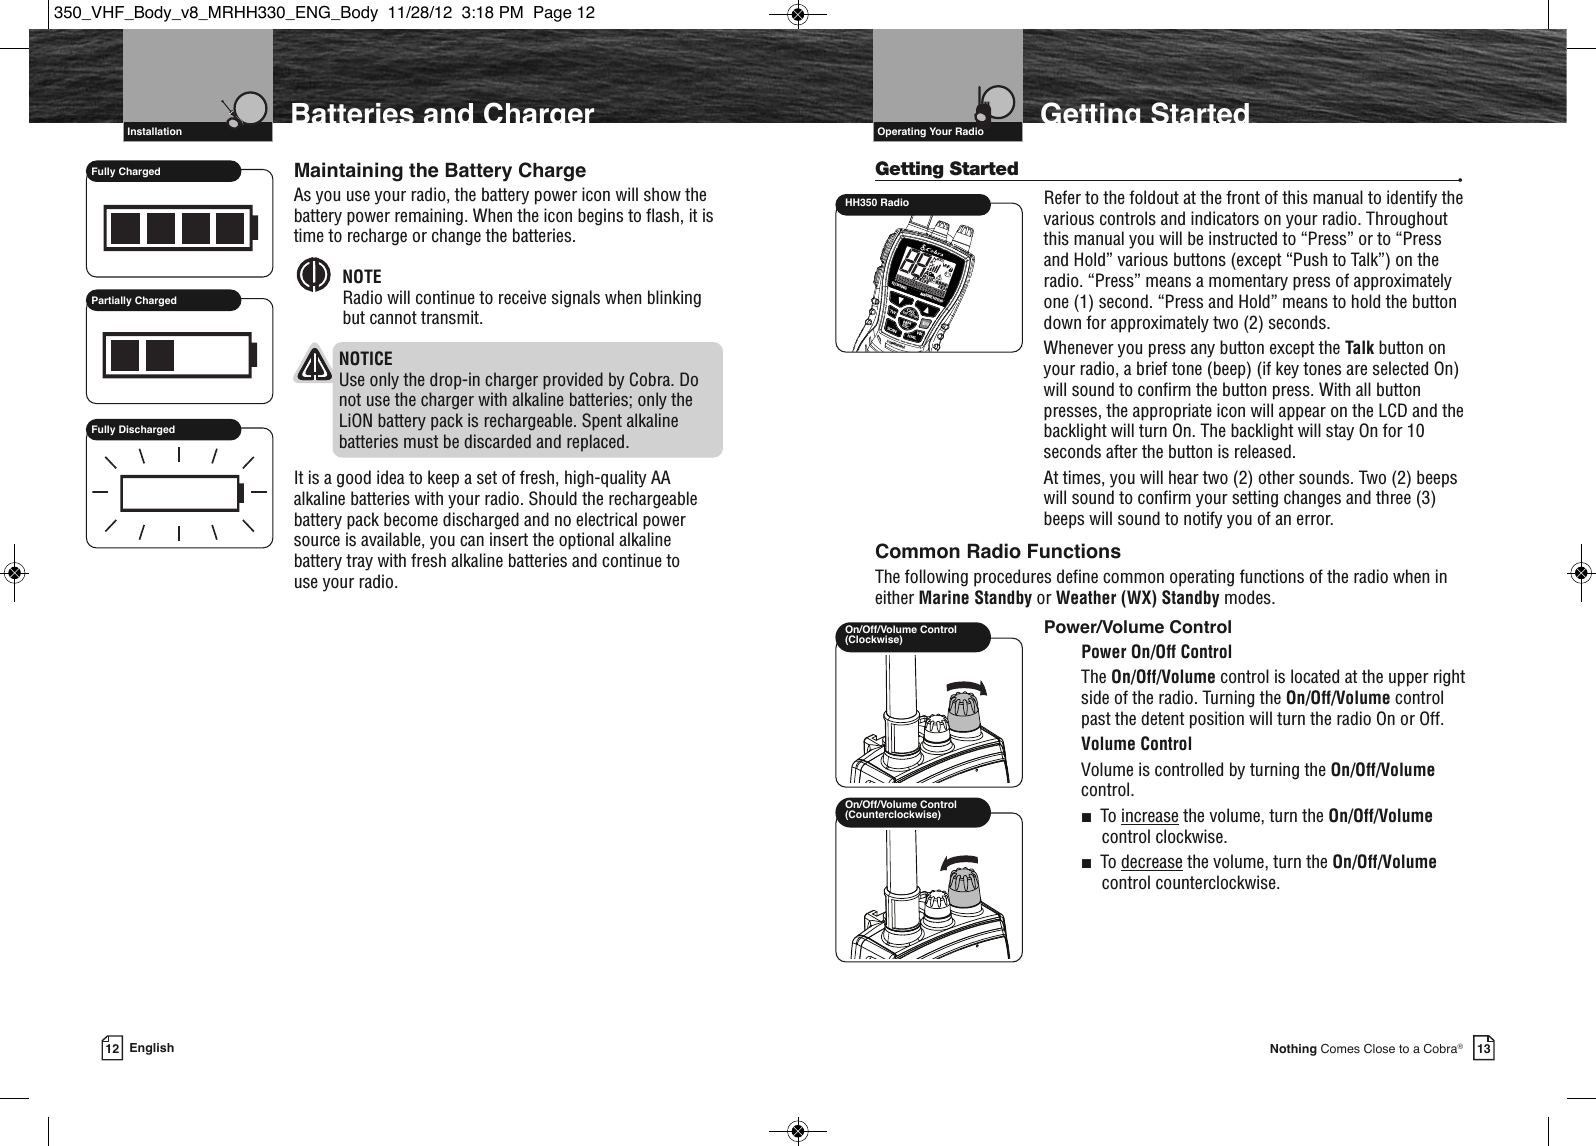 Page 9 of Cobra Electronics MRHH350 MARINE TRANSCEIVER User Manual MRHH330 ENG Body